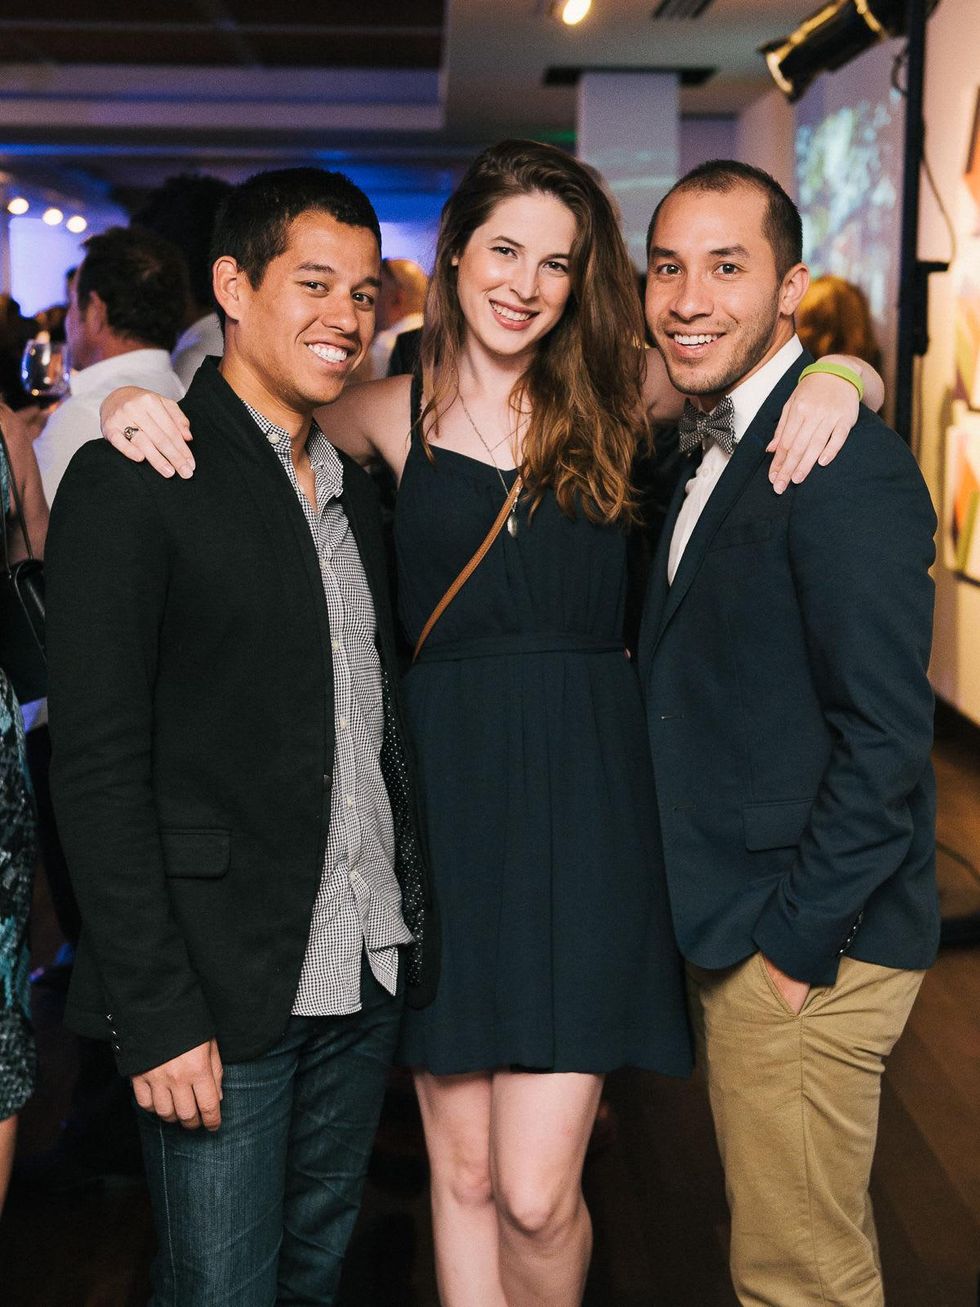 21 David Livasy, from left, Morgan Aven and Daniel Ruszkiewicz at CultureMap fifth anniversary birthday party October 2014